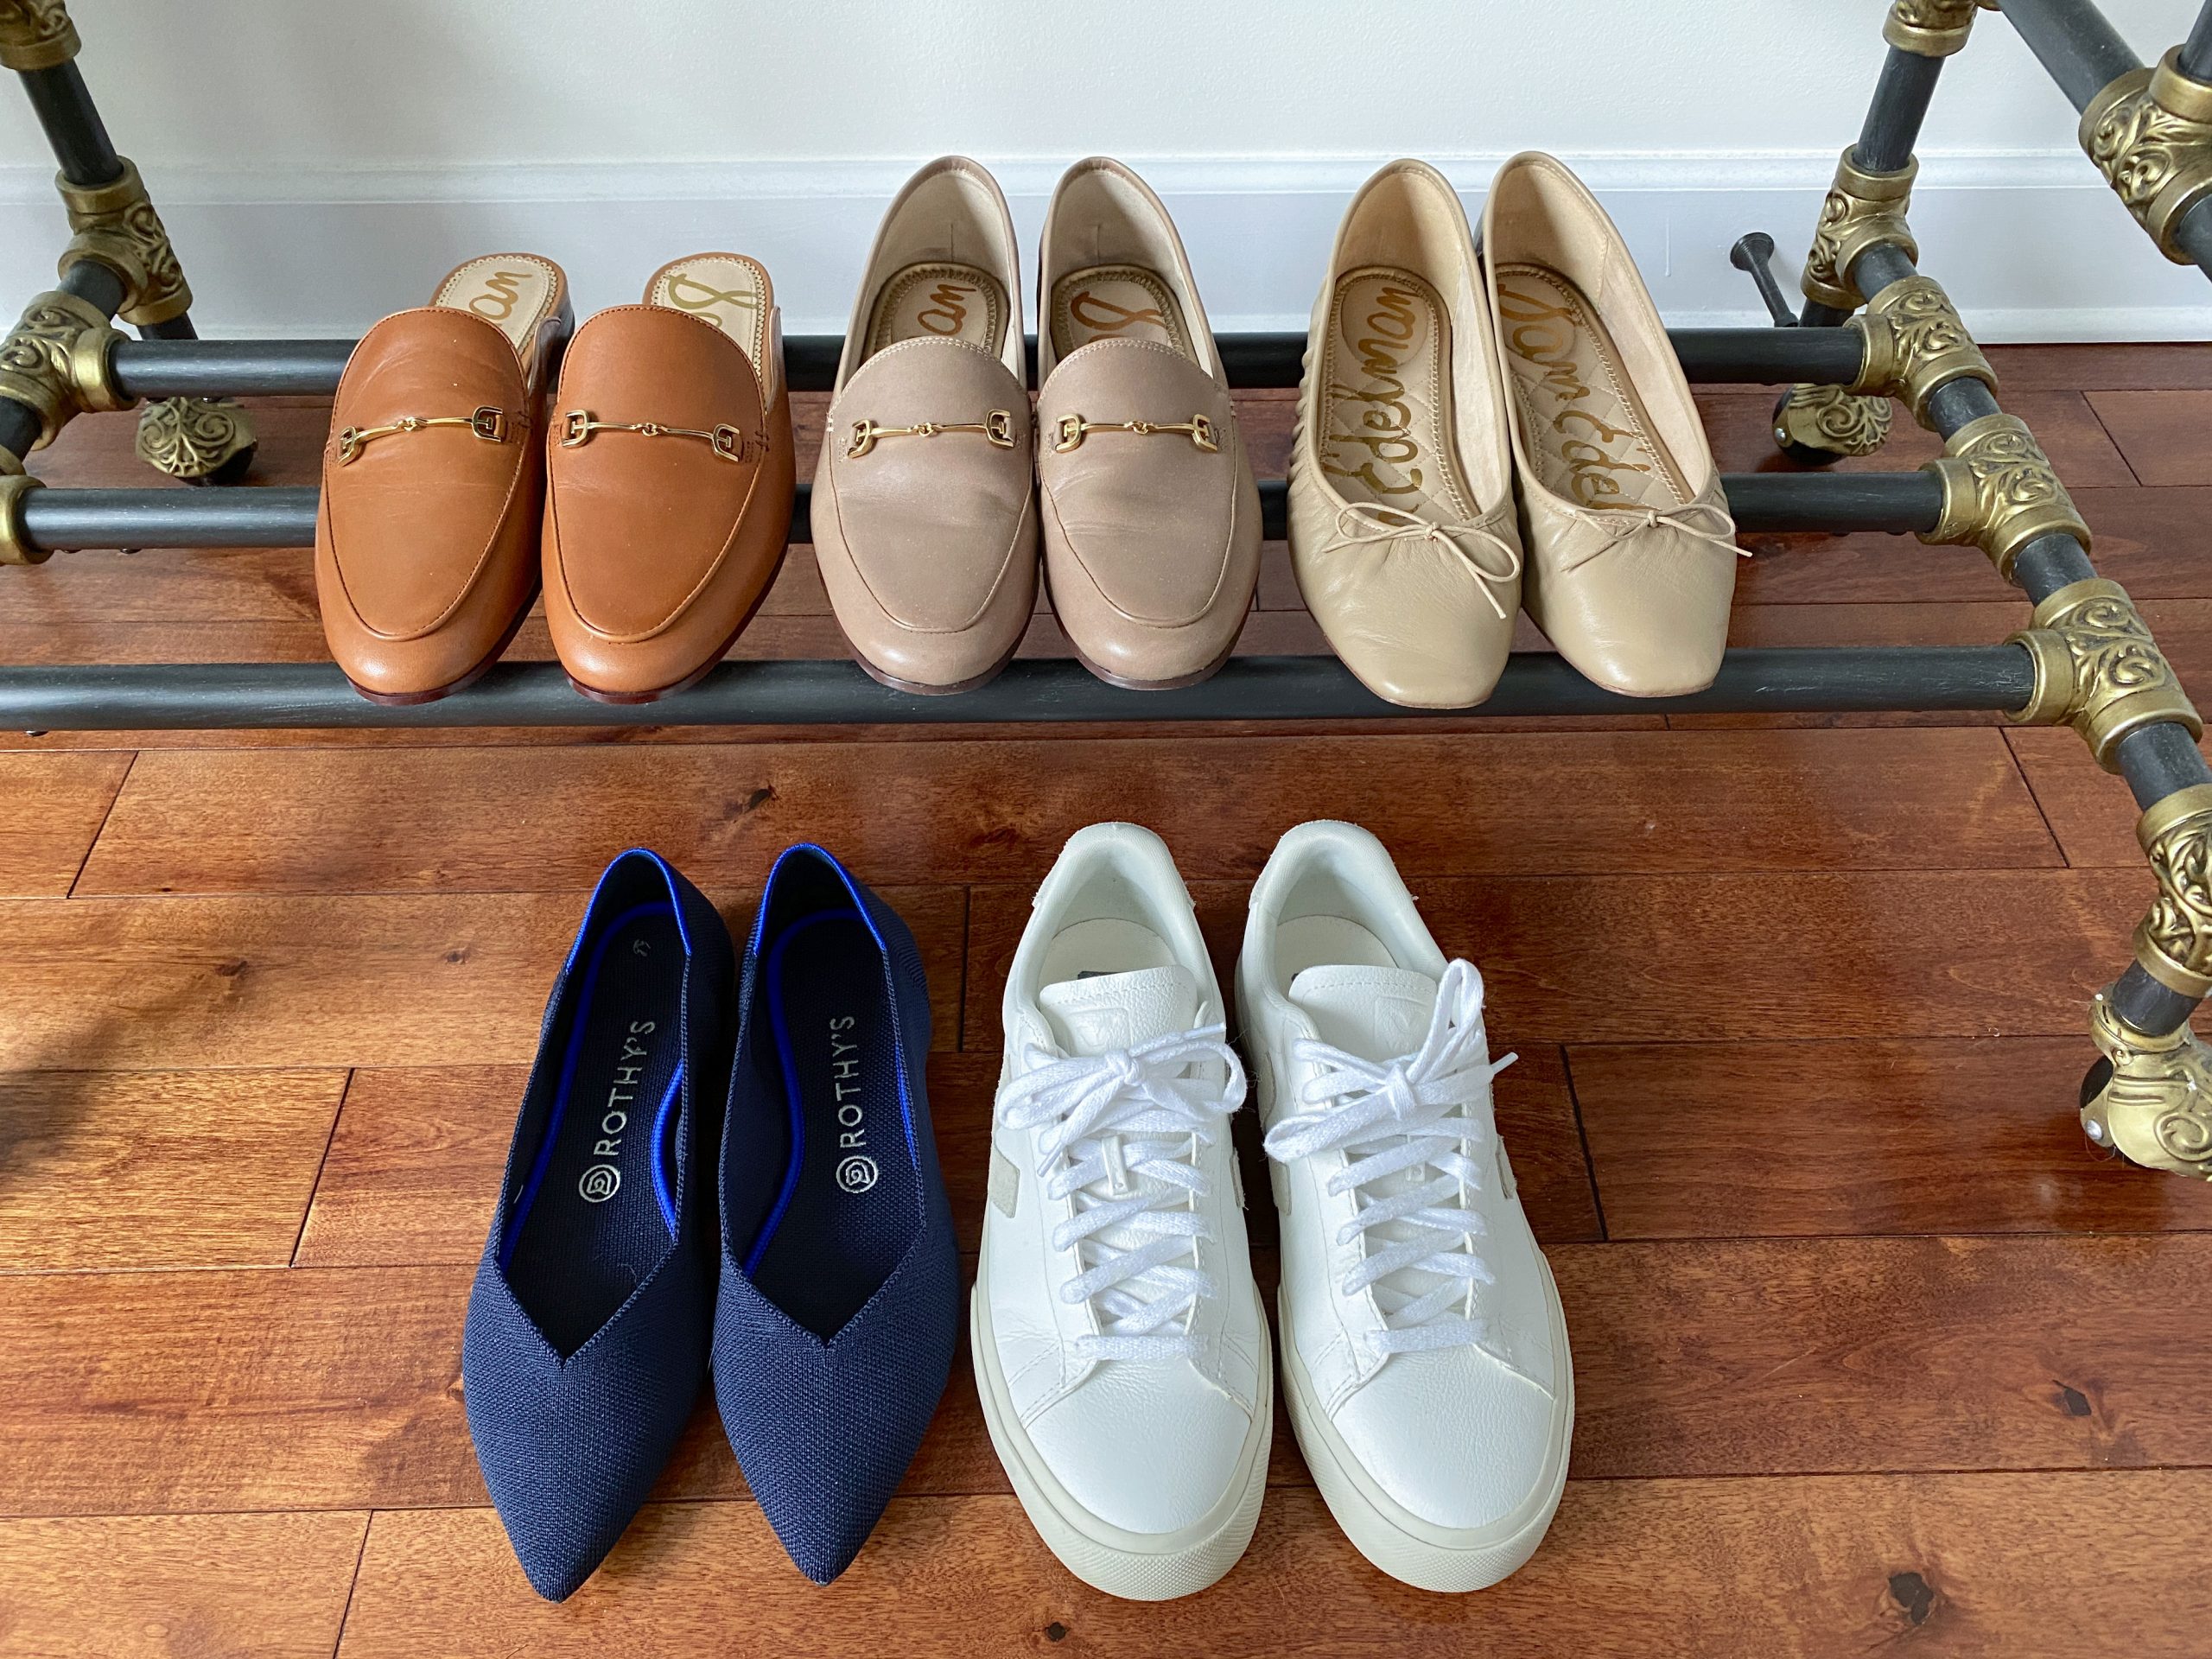 My Spring 2022 Classic Neutral+Color Capsule Wardrobe - Classy Yet